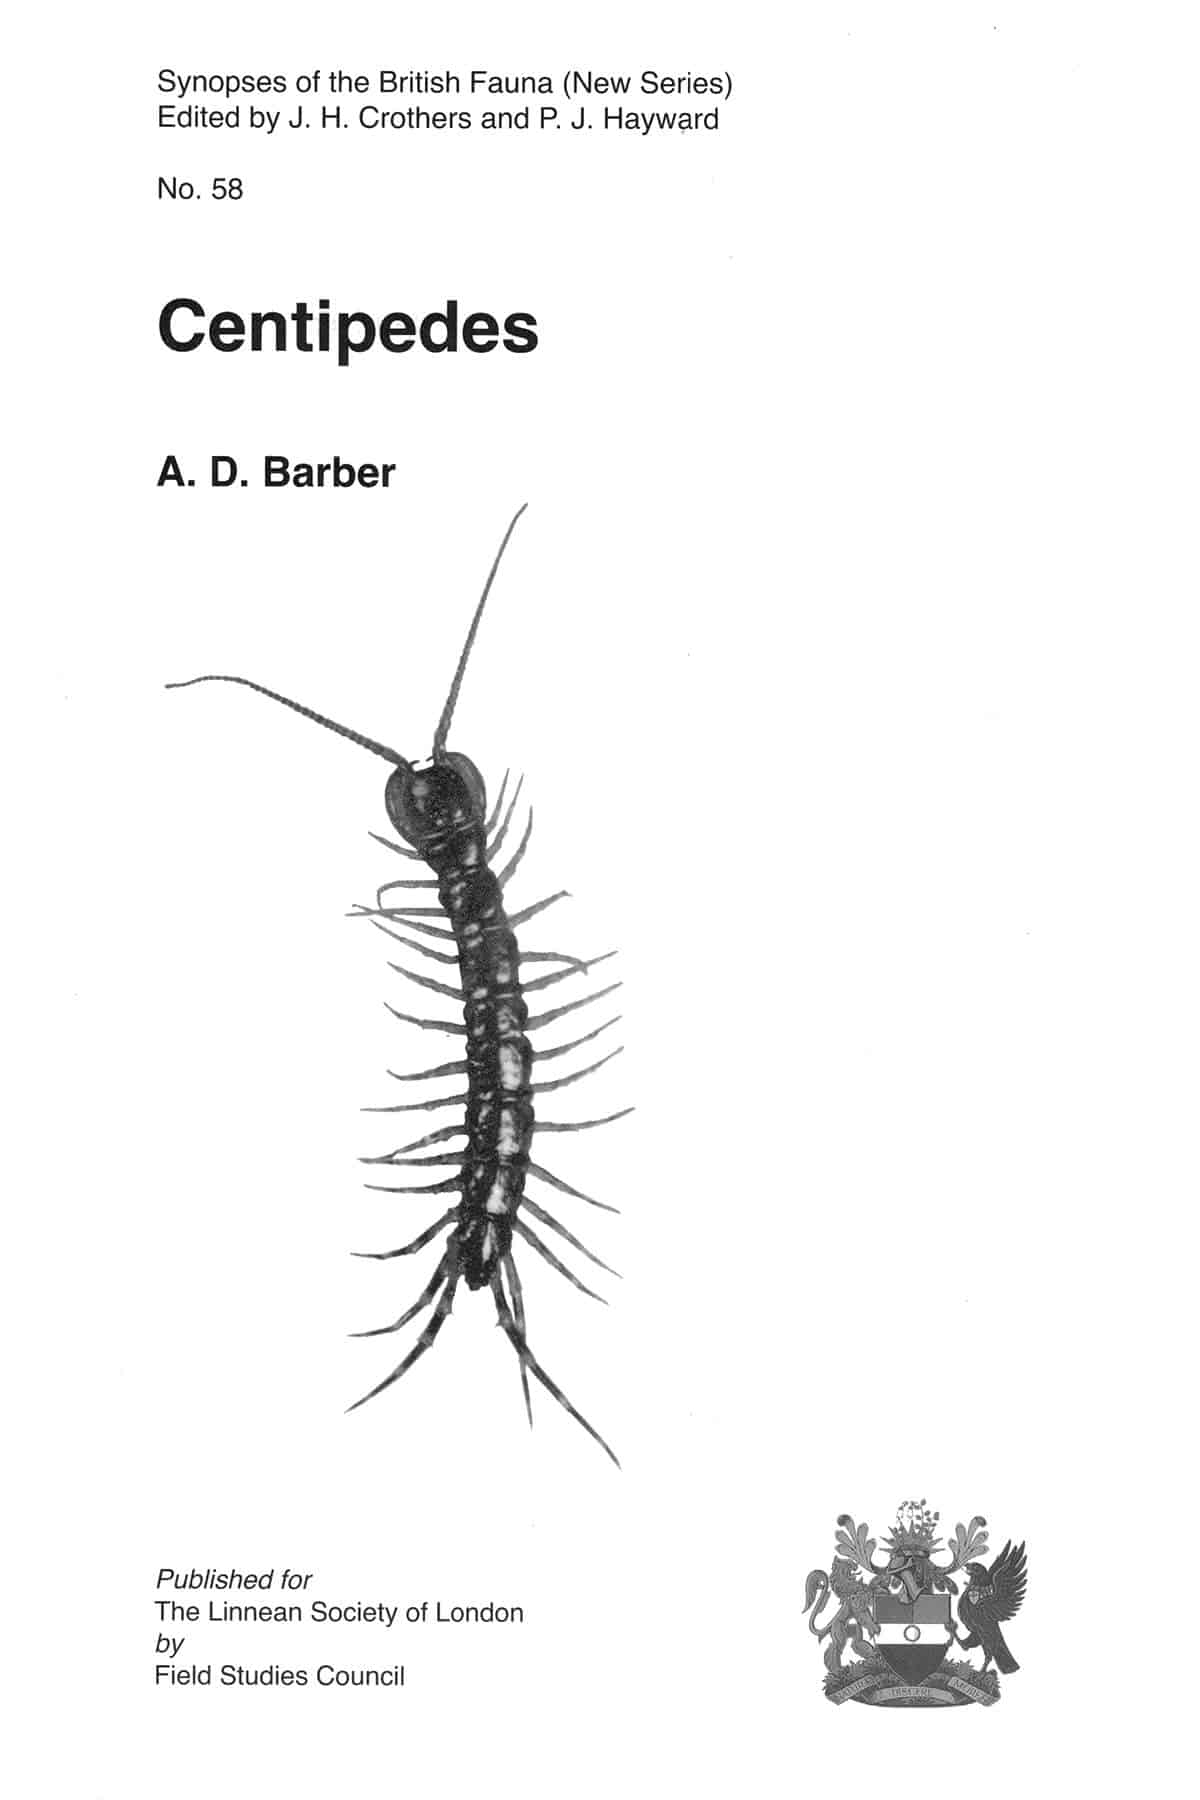 Centipedes Synopsis Linnean Synopsis softback book 61 Species